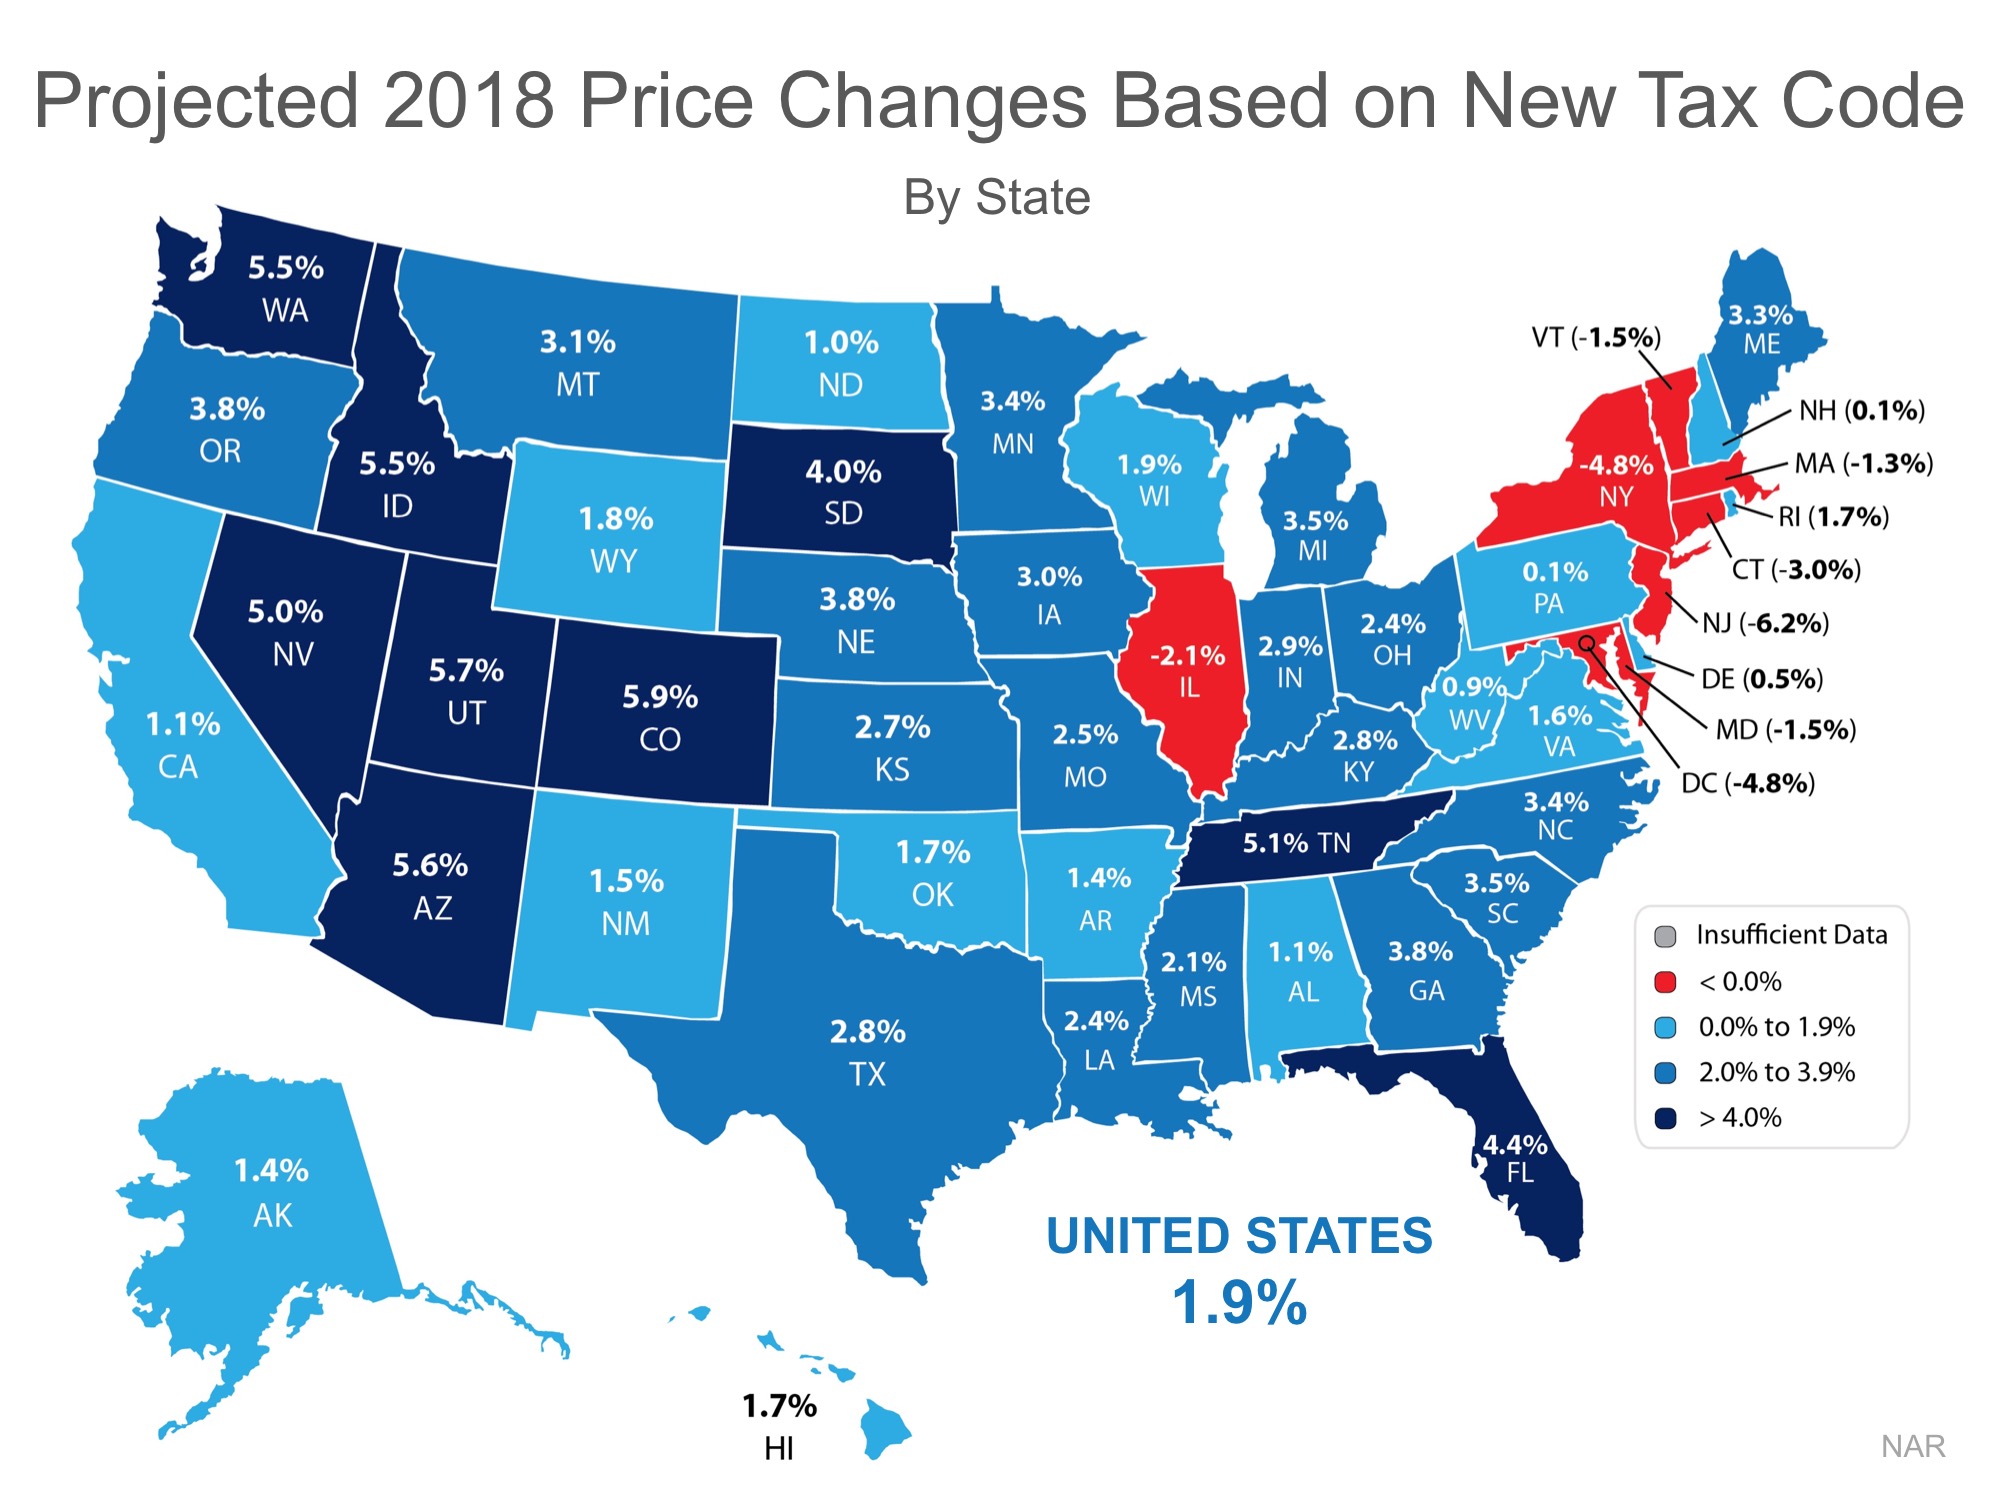 What Impact Will the New Tax Code Have on Home Values? | Simplifying The Market